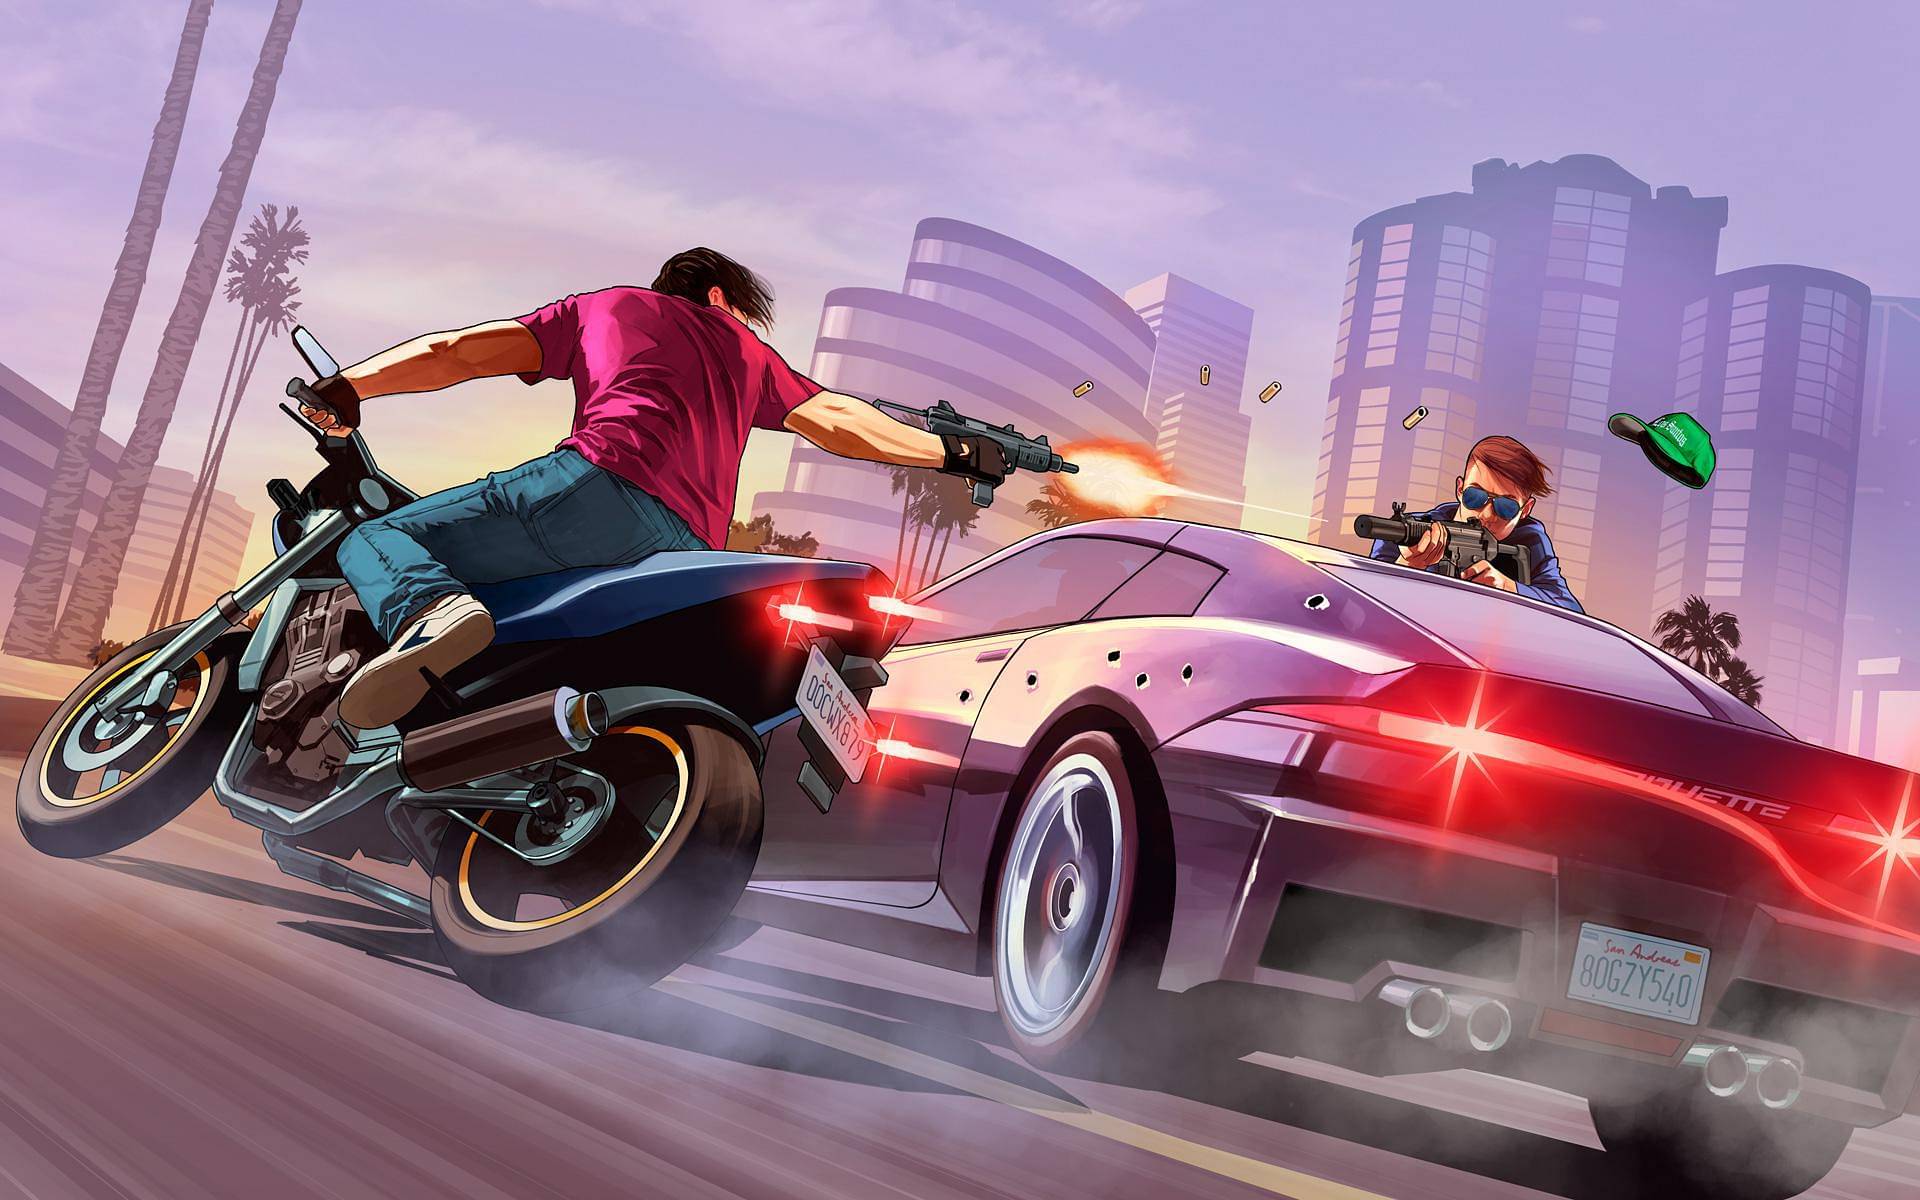 GTA 6 could be a game-changer